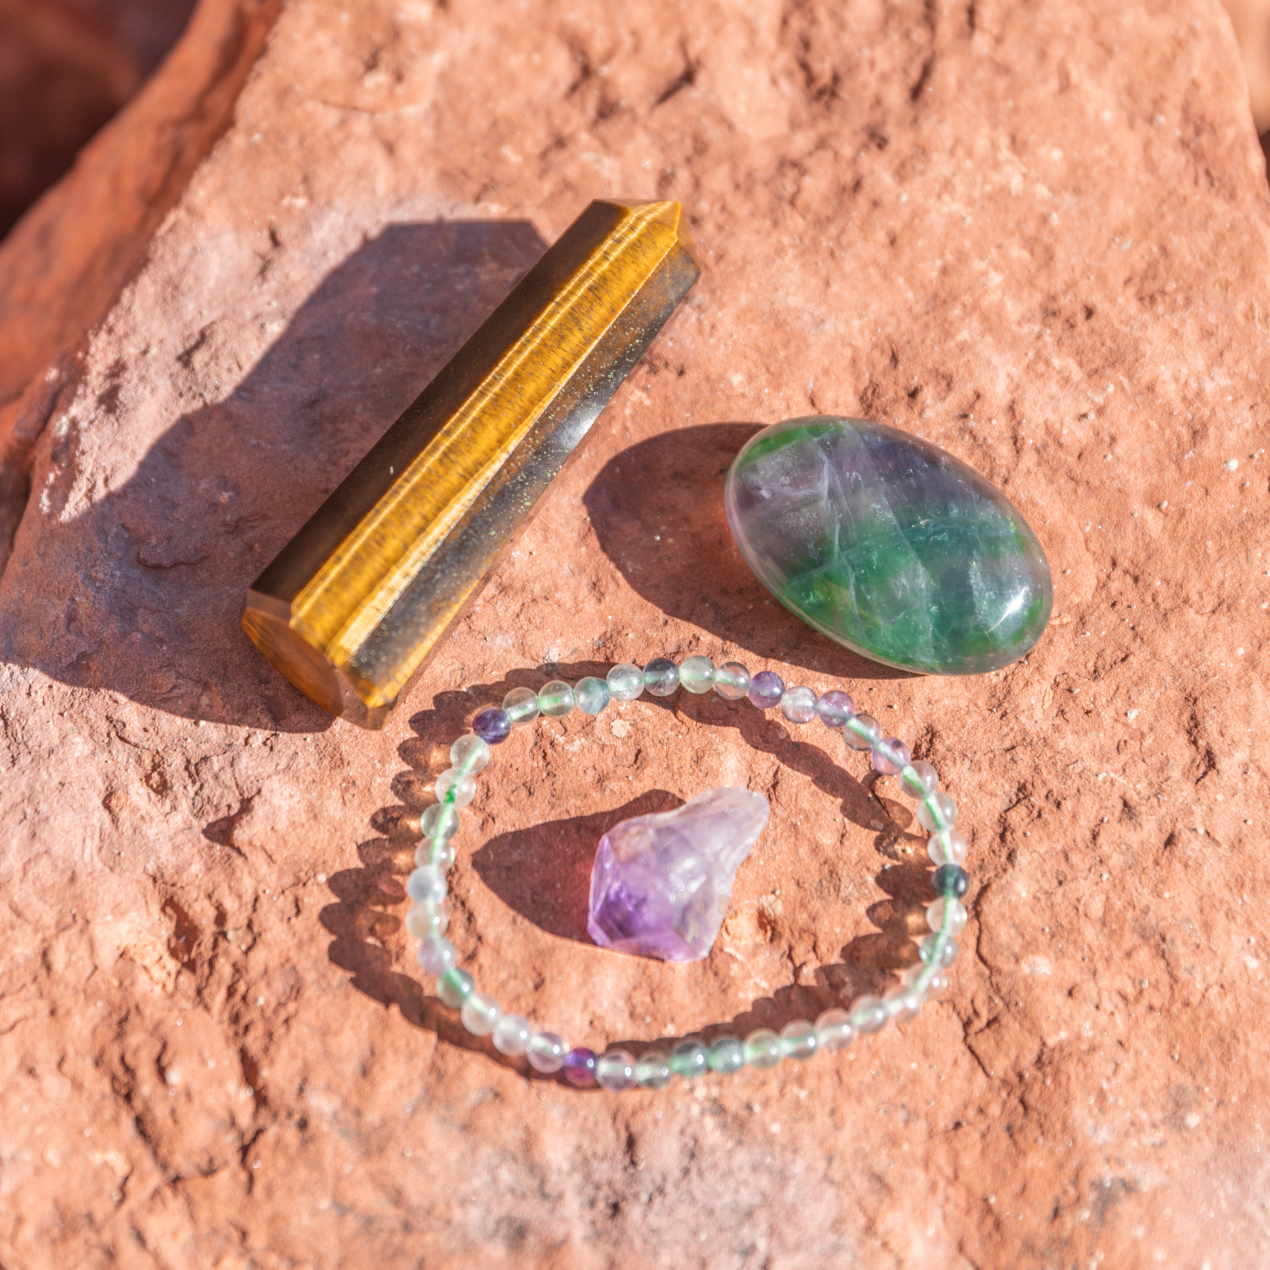 healing crystals: a bundle of crystals used to help with focus in sedona, arizona